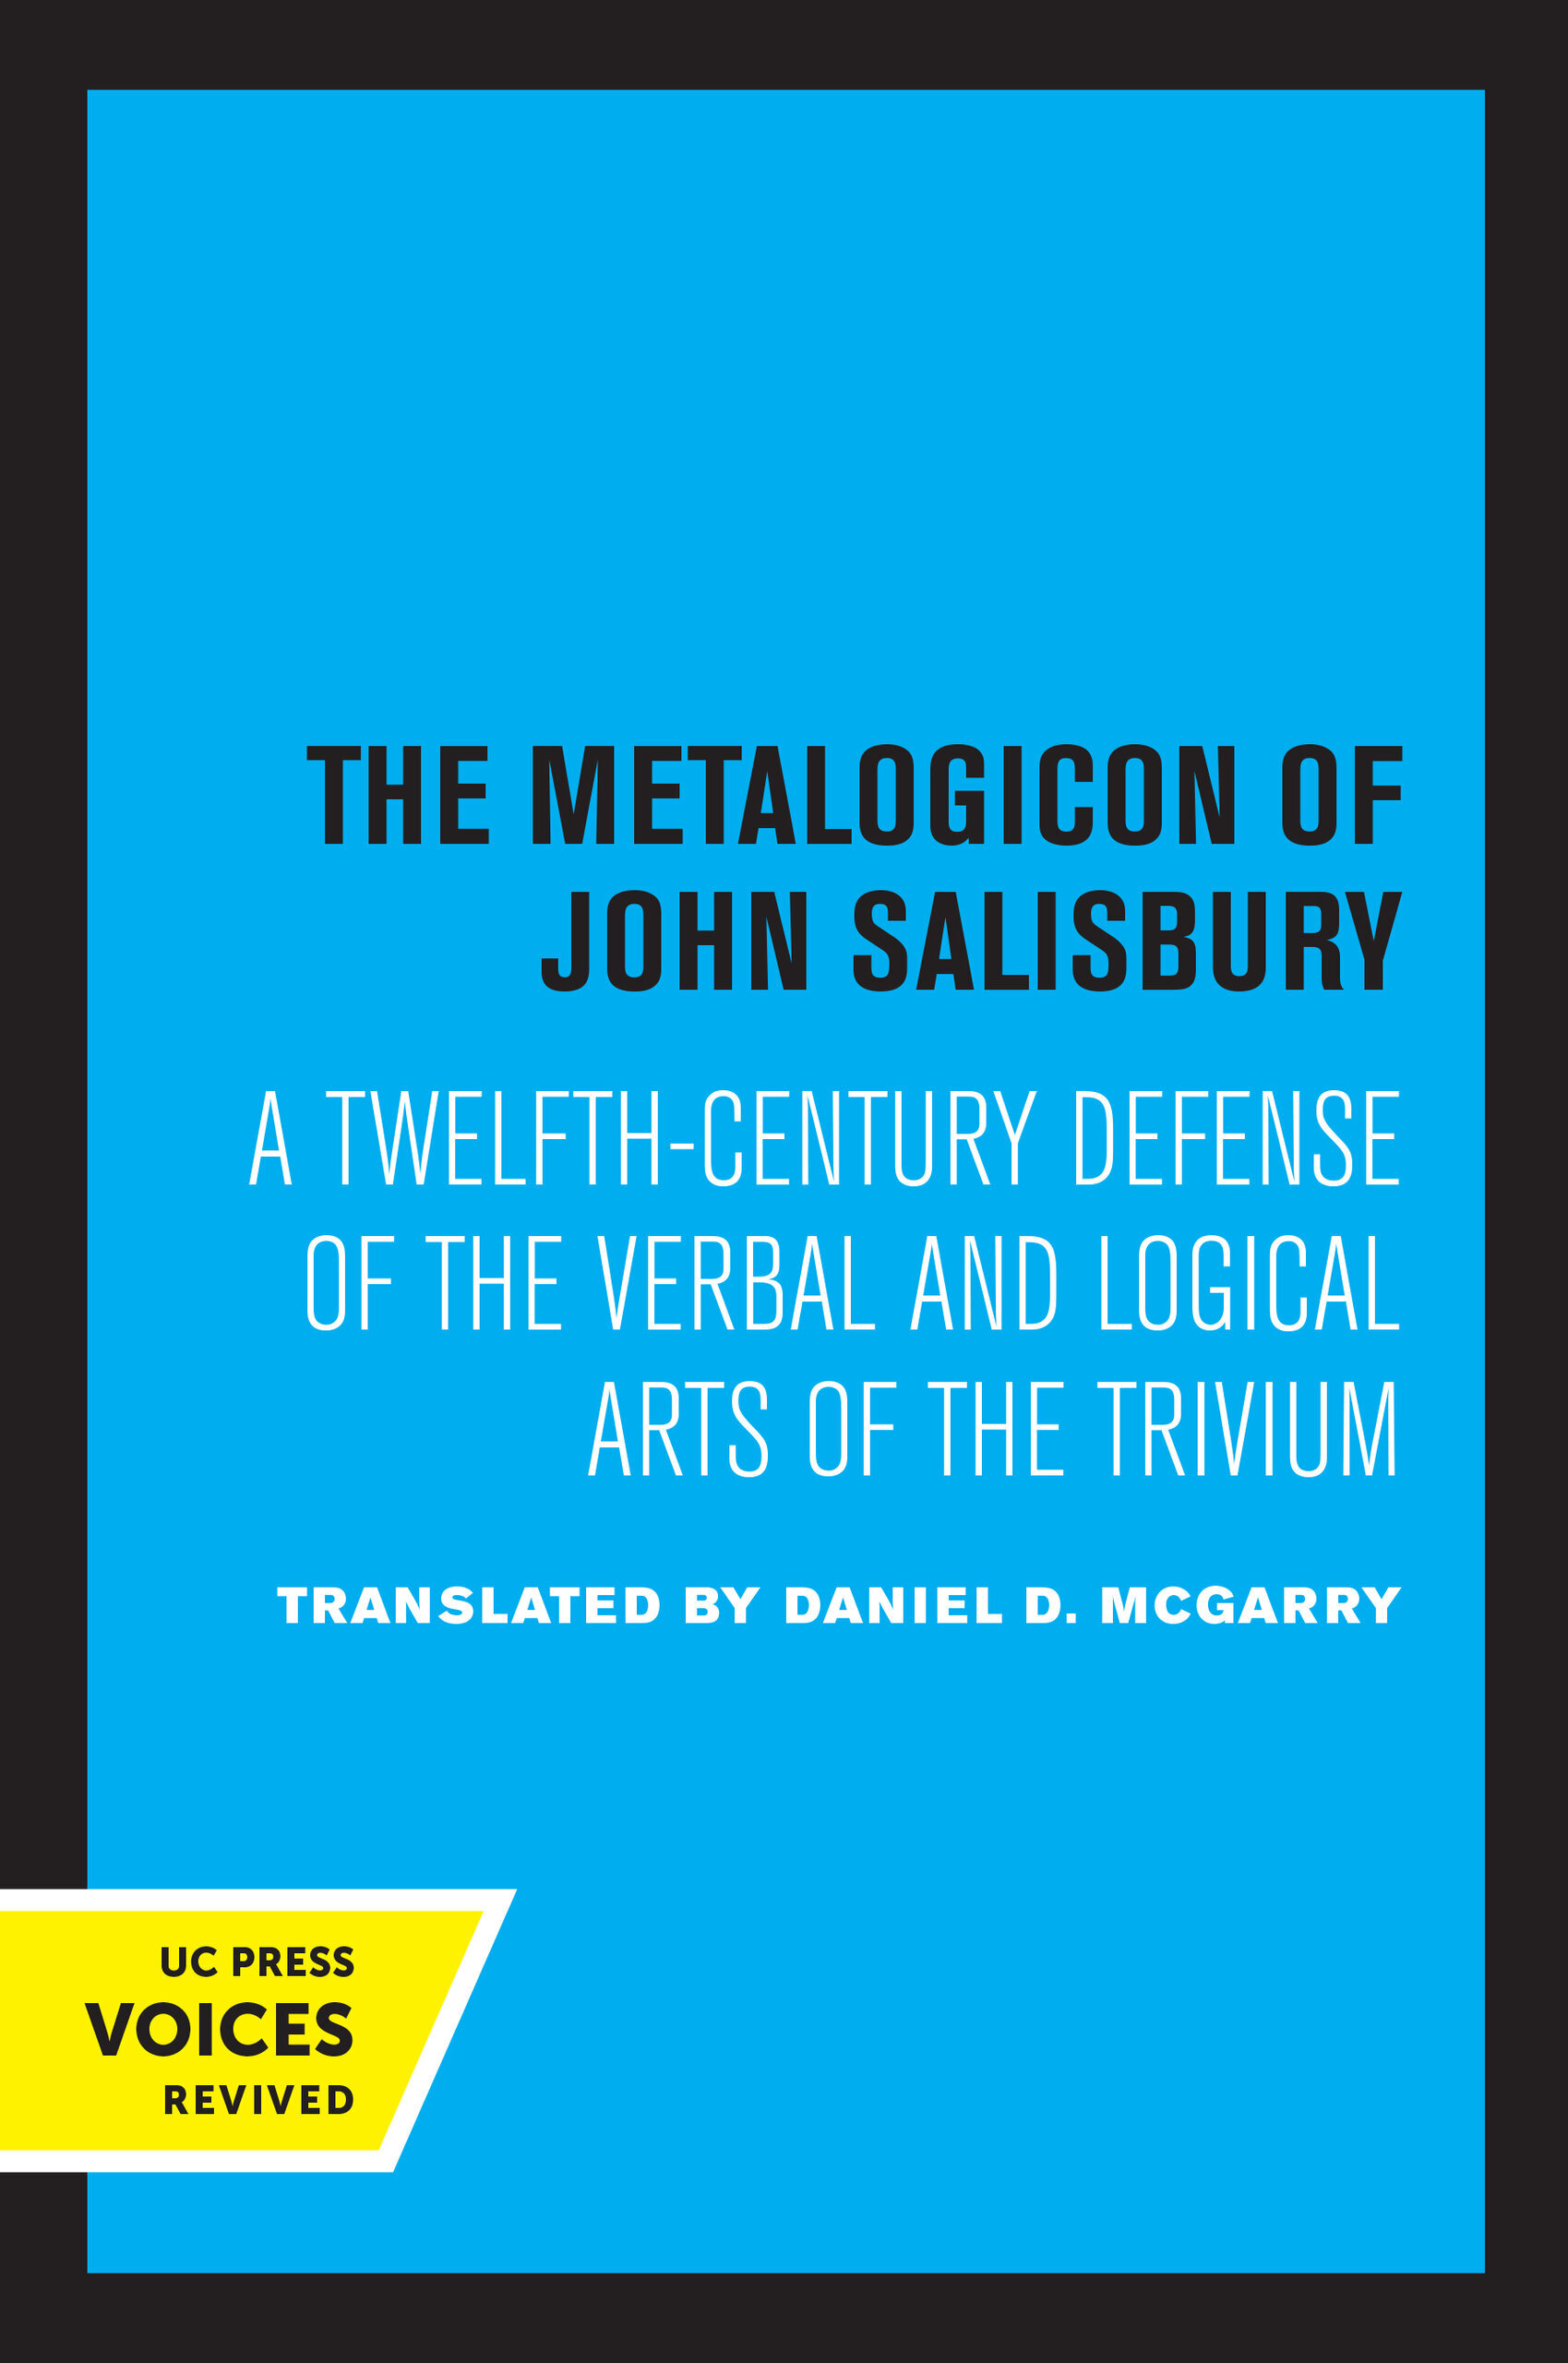 The Metalogicon: A Twelfth-Century Defense of the Verbal and Logical Arts of the Trivium